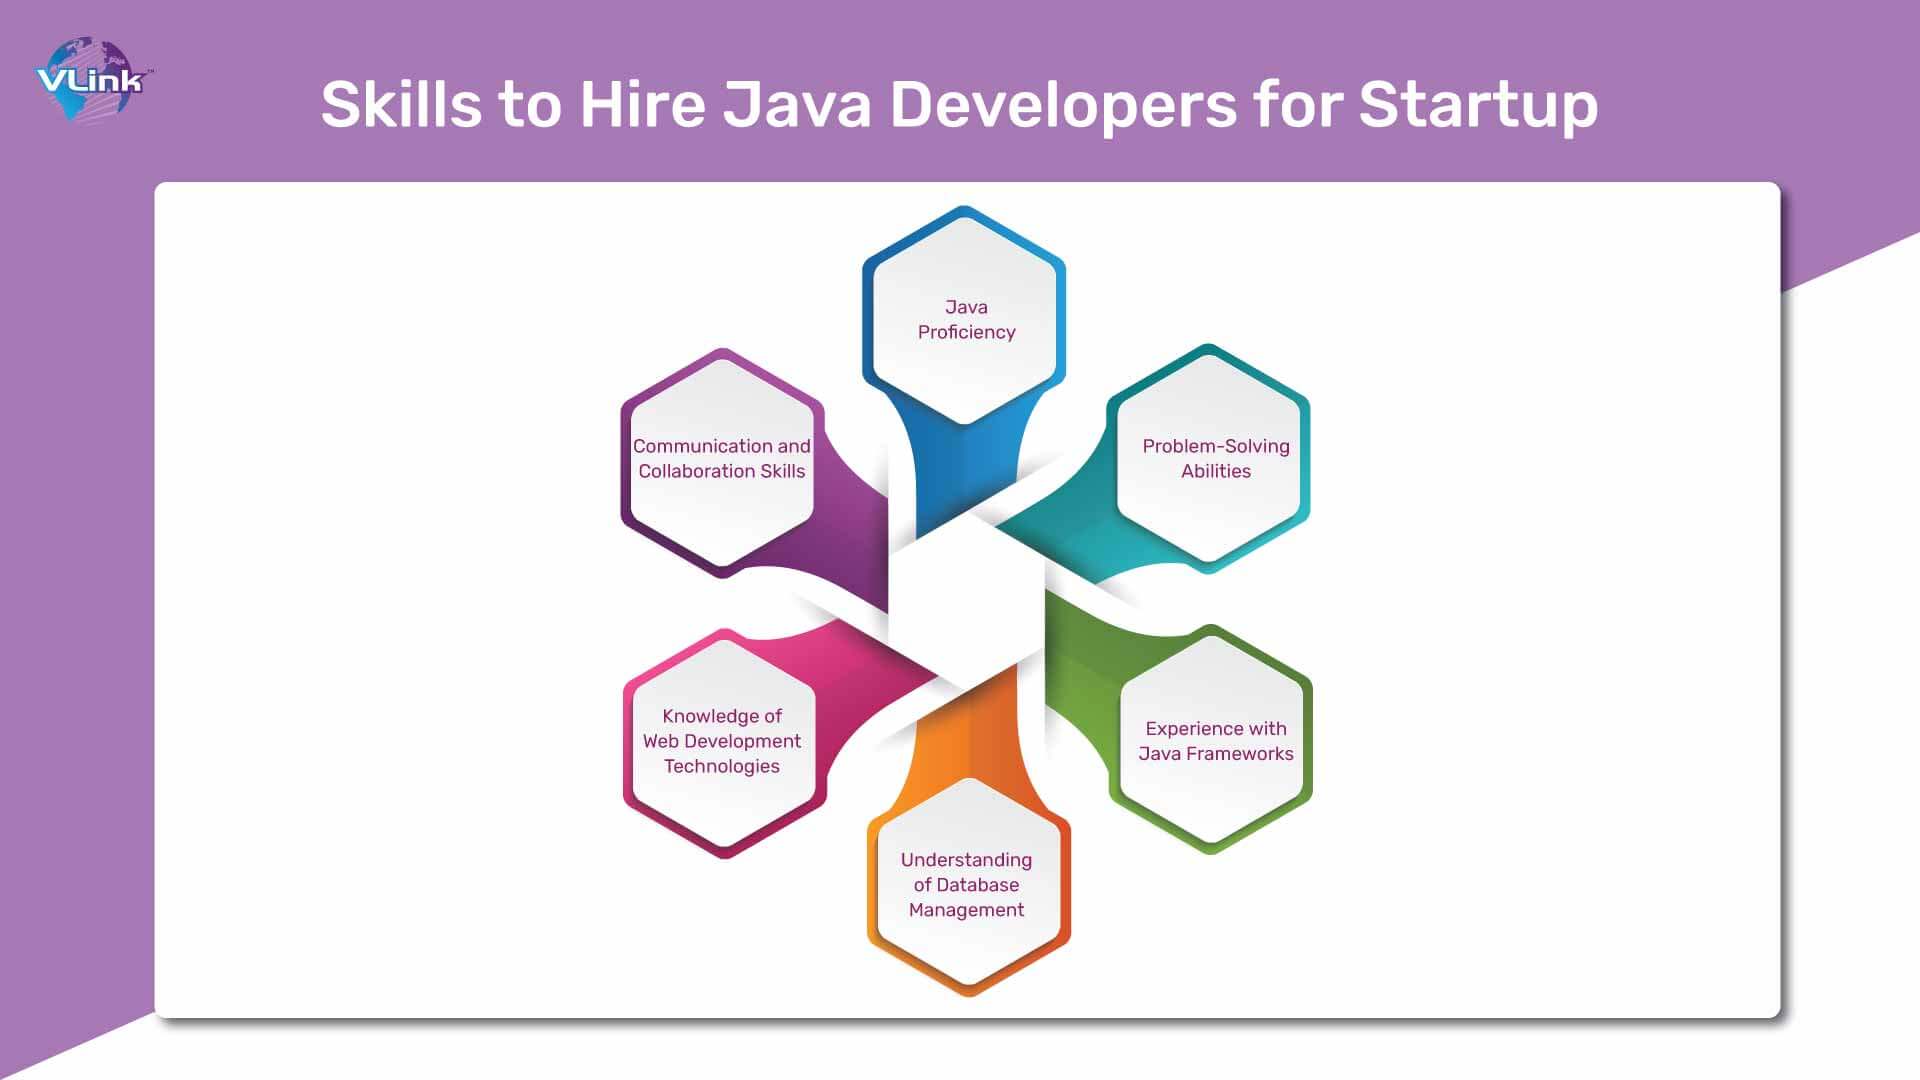 Skills to Consider When Hire Java Developers for Tech Startup